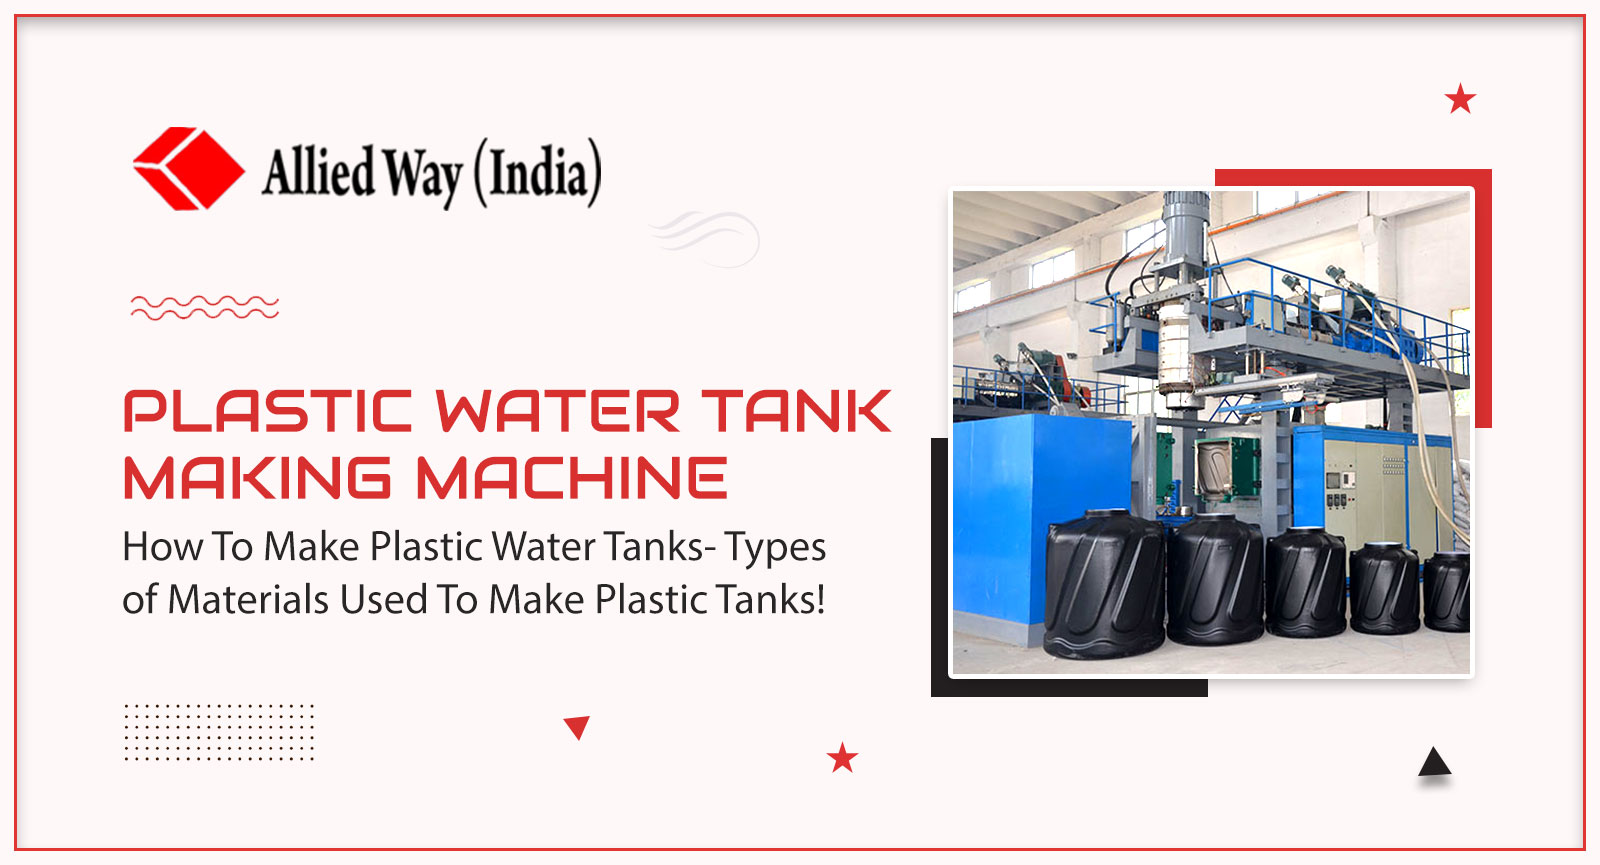 How To Make Plastic Water Tanks- Types of Materials Used To Make Plastic Tanks!, Allied Way (India)